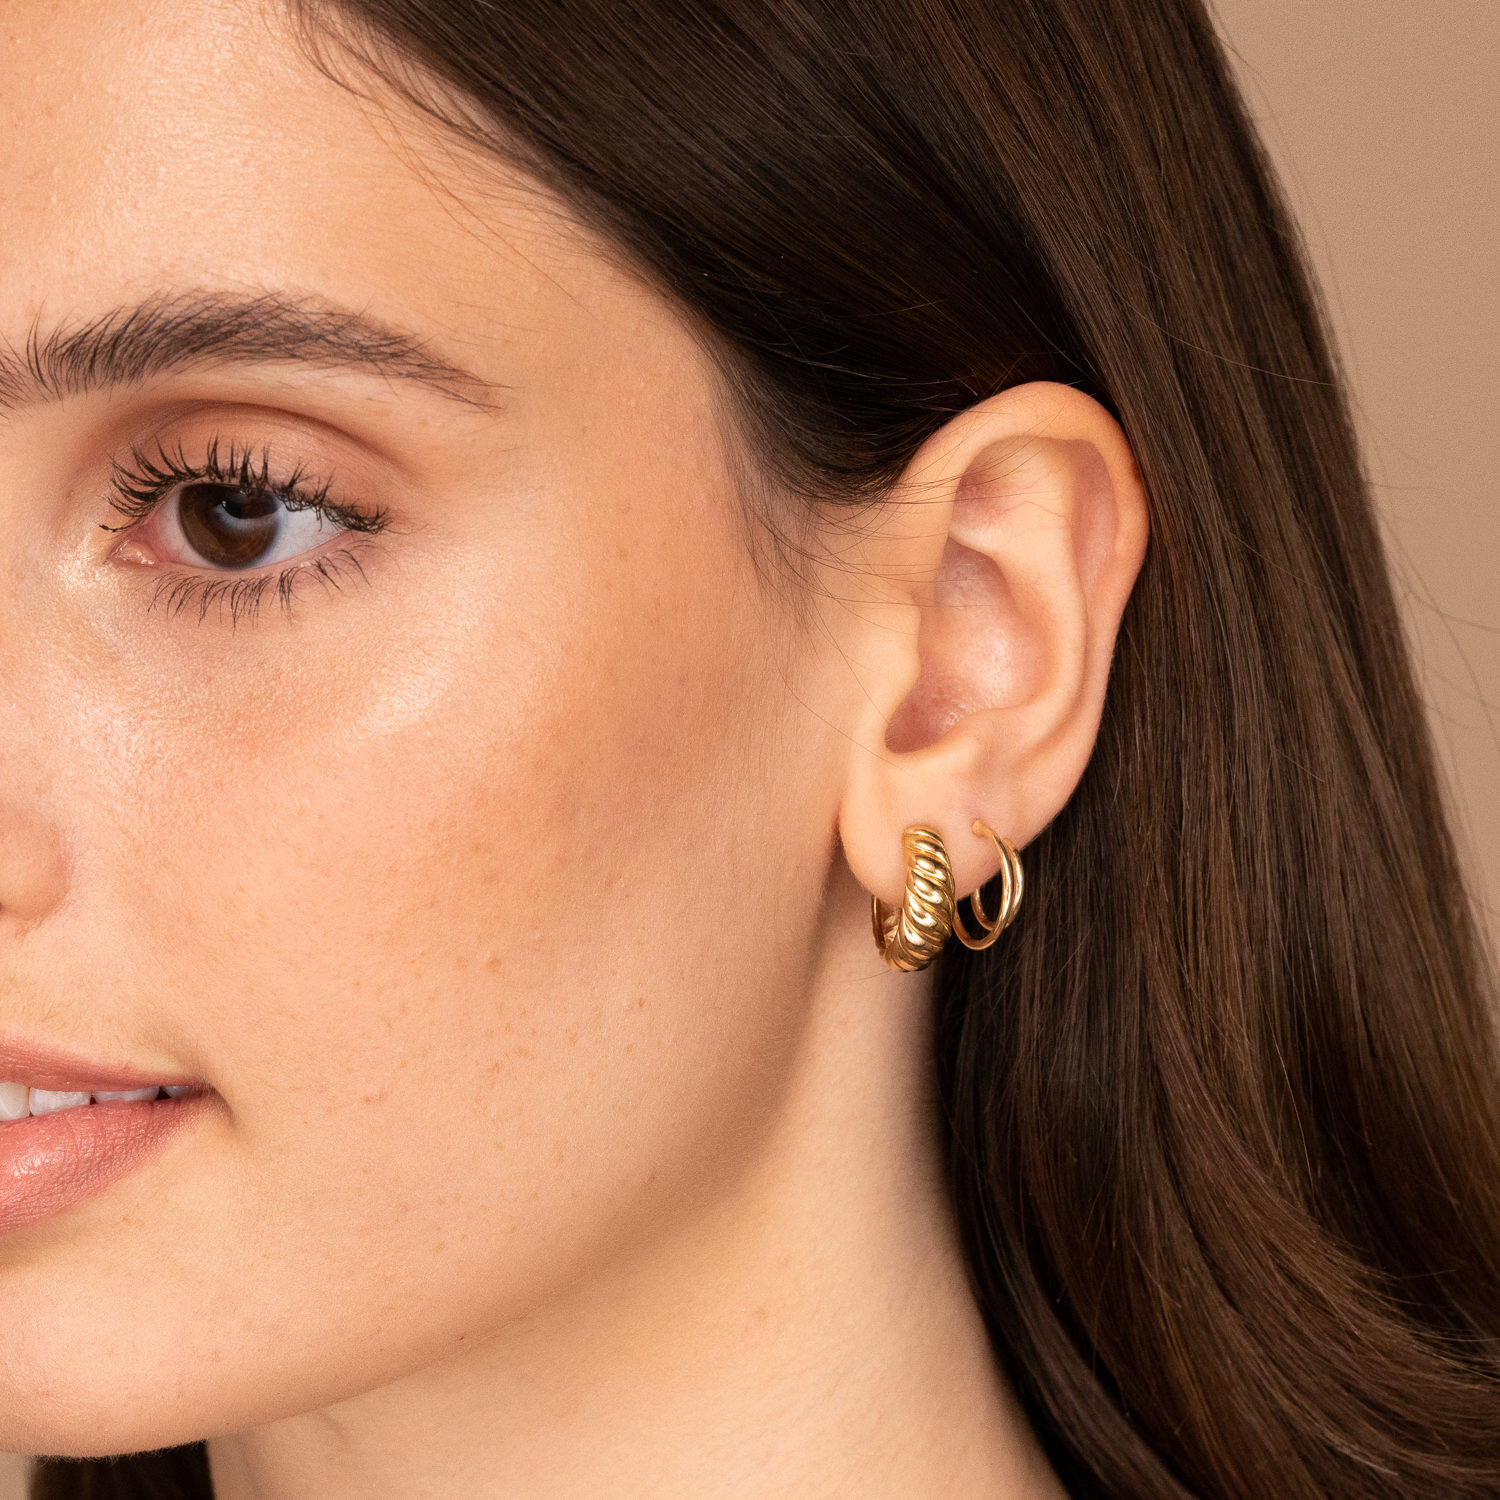 2019-08-12_CroissantDome-Product-Croissant_Dôme_Earrings-Stacked.jpg